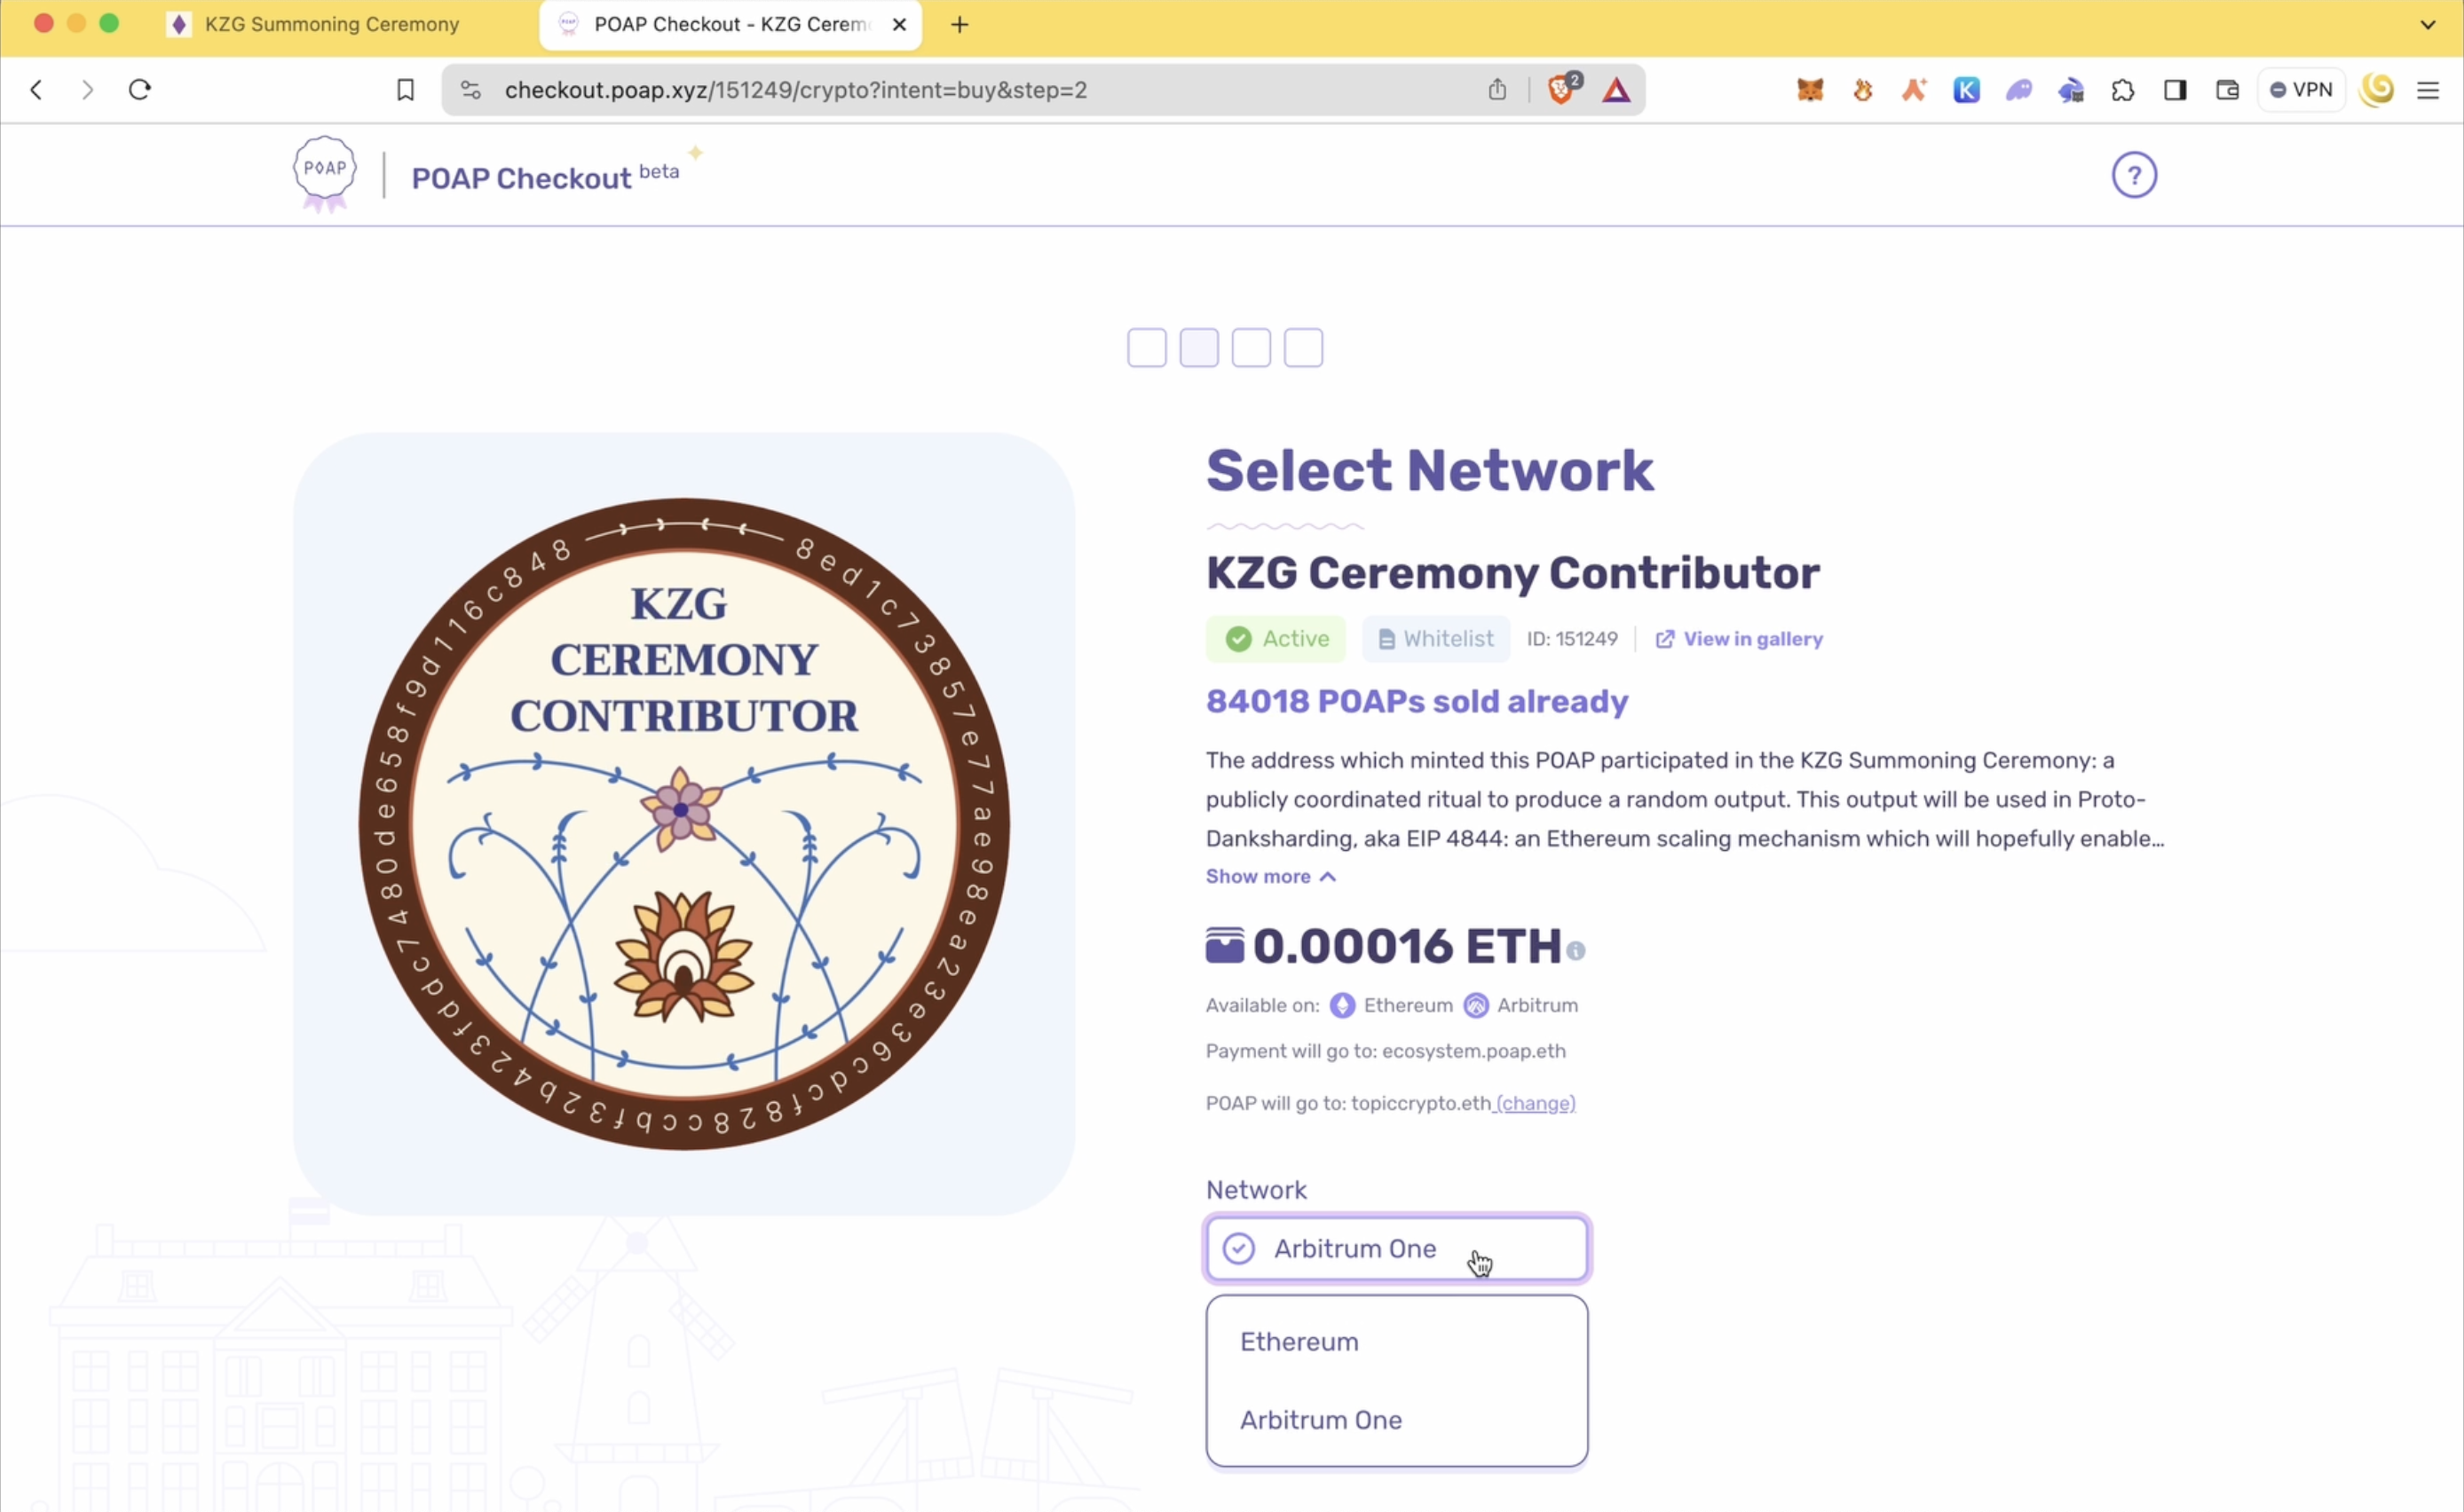 Connect Your Wallet And Select Which Network To Claim The POAP On